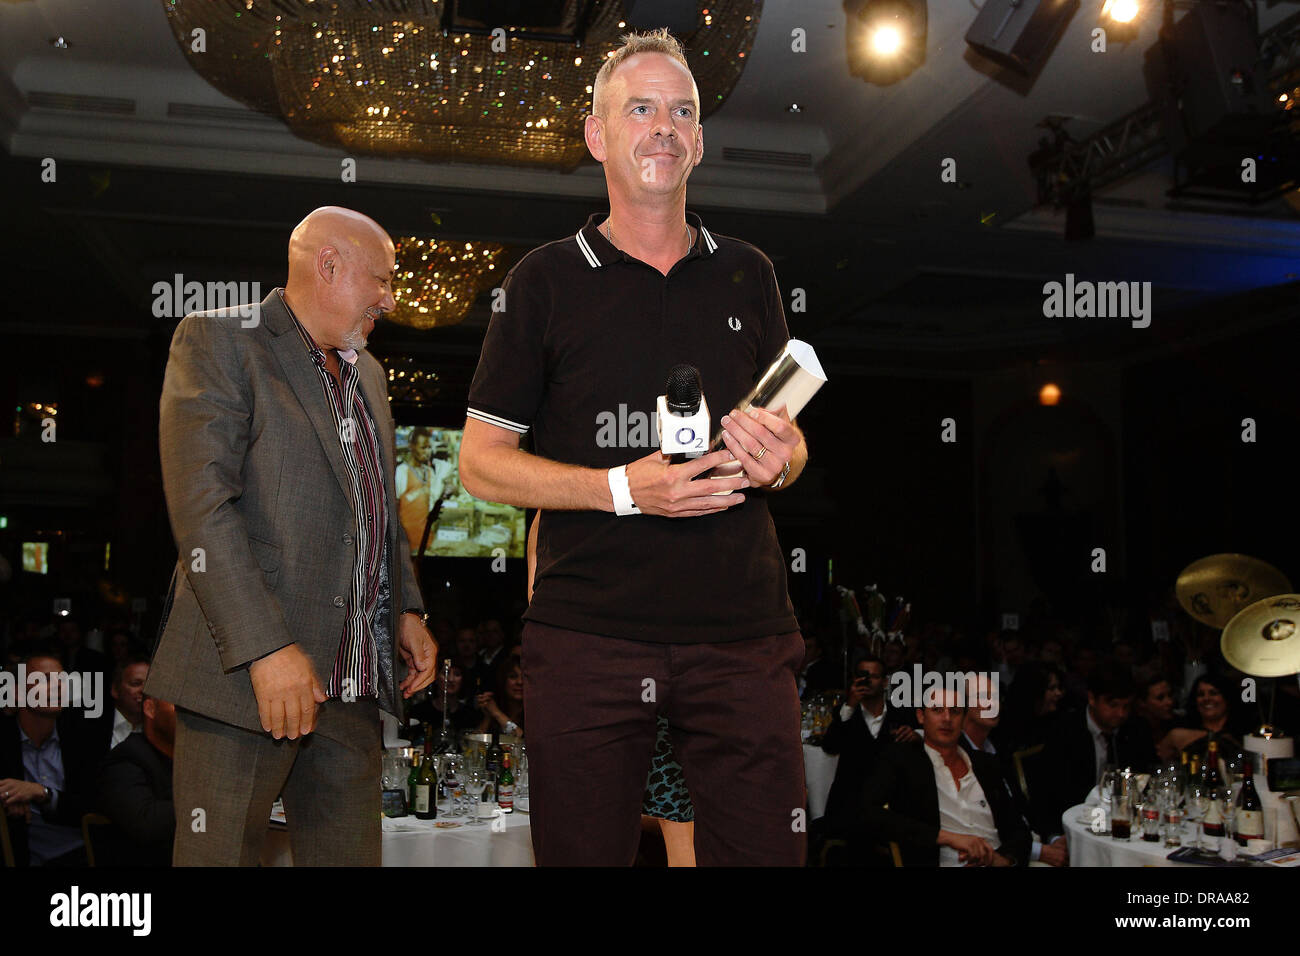 Norman Cook aka Fat Boy Slim receives the Investec Icon Award,  The Nordoff Robbins O2 Silver Clef Awards held at the Hilton Park Lane. London, England - 29.06.12 Stock Photo